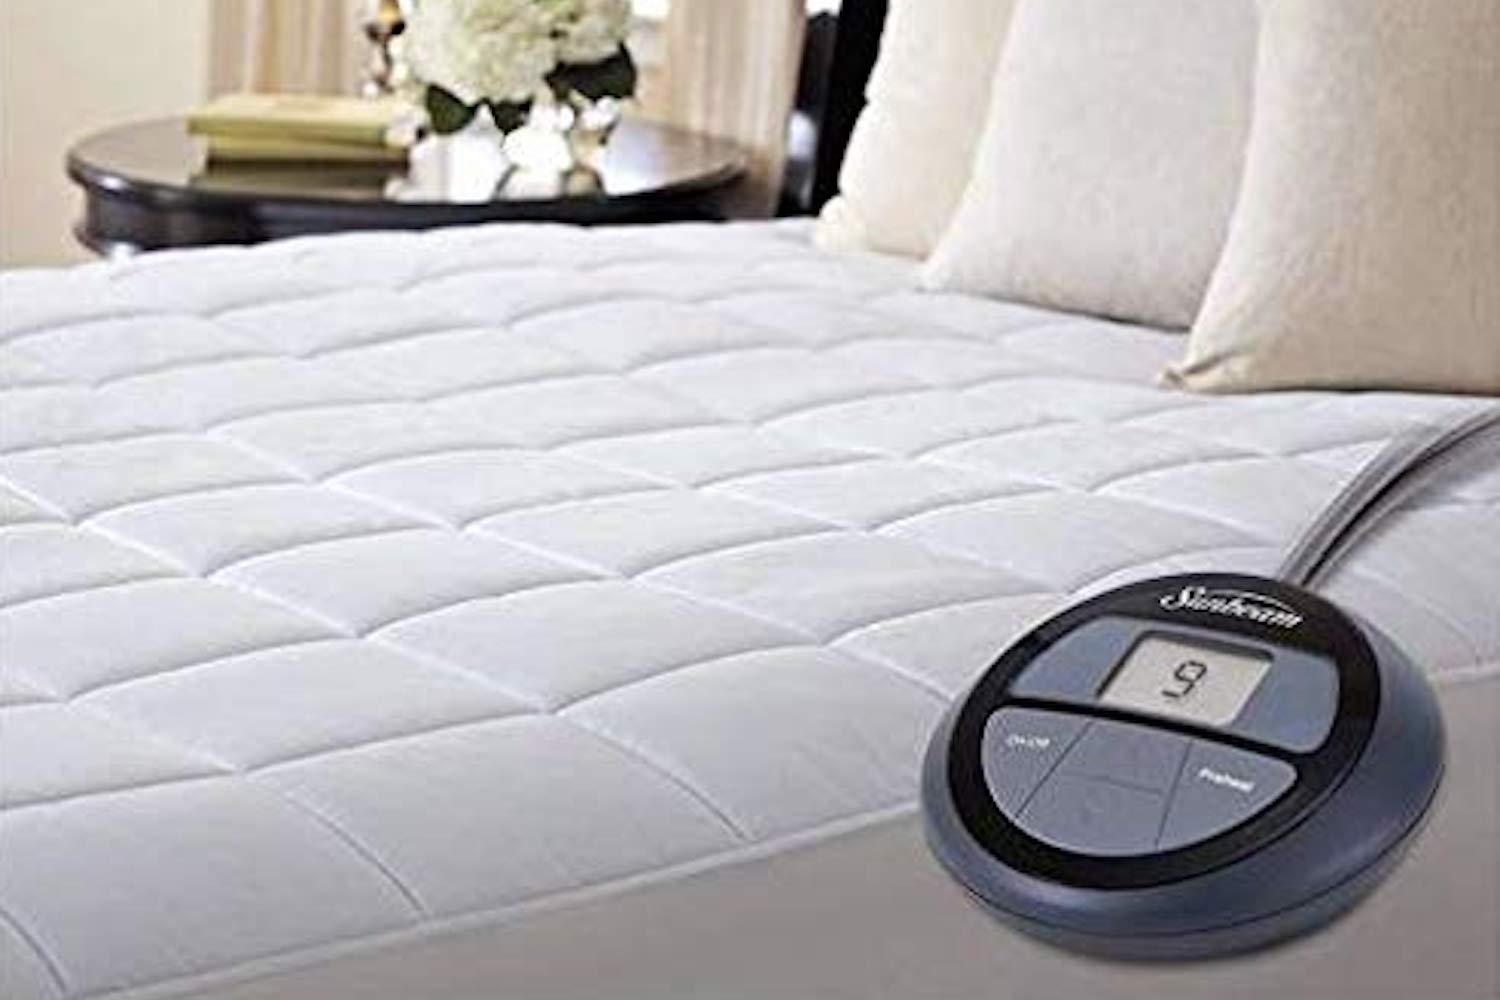 heated mattress pad goes under fitted sheet